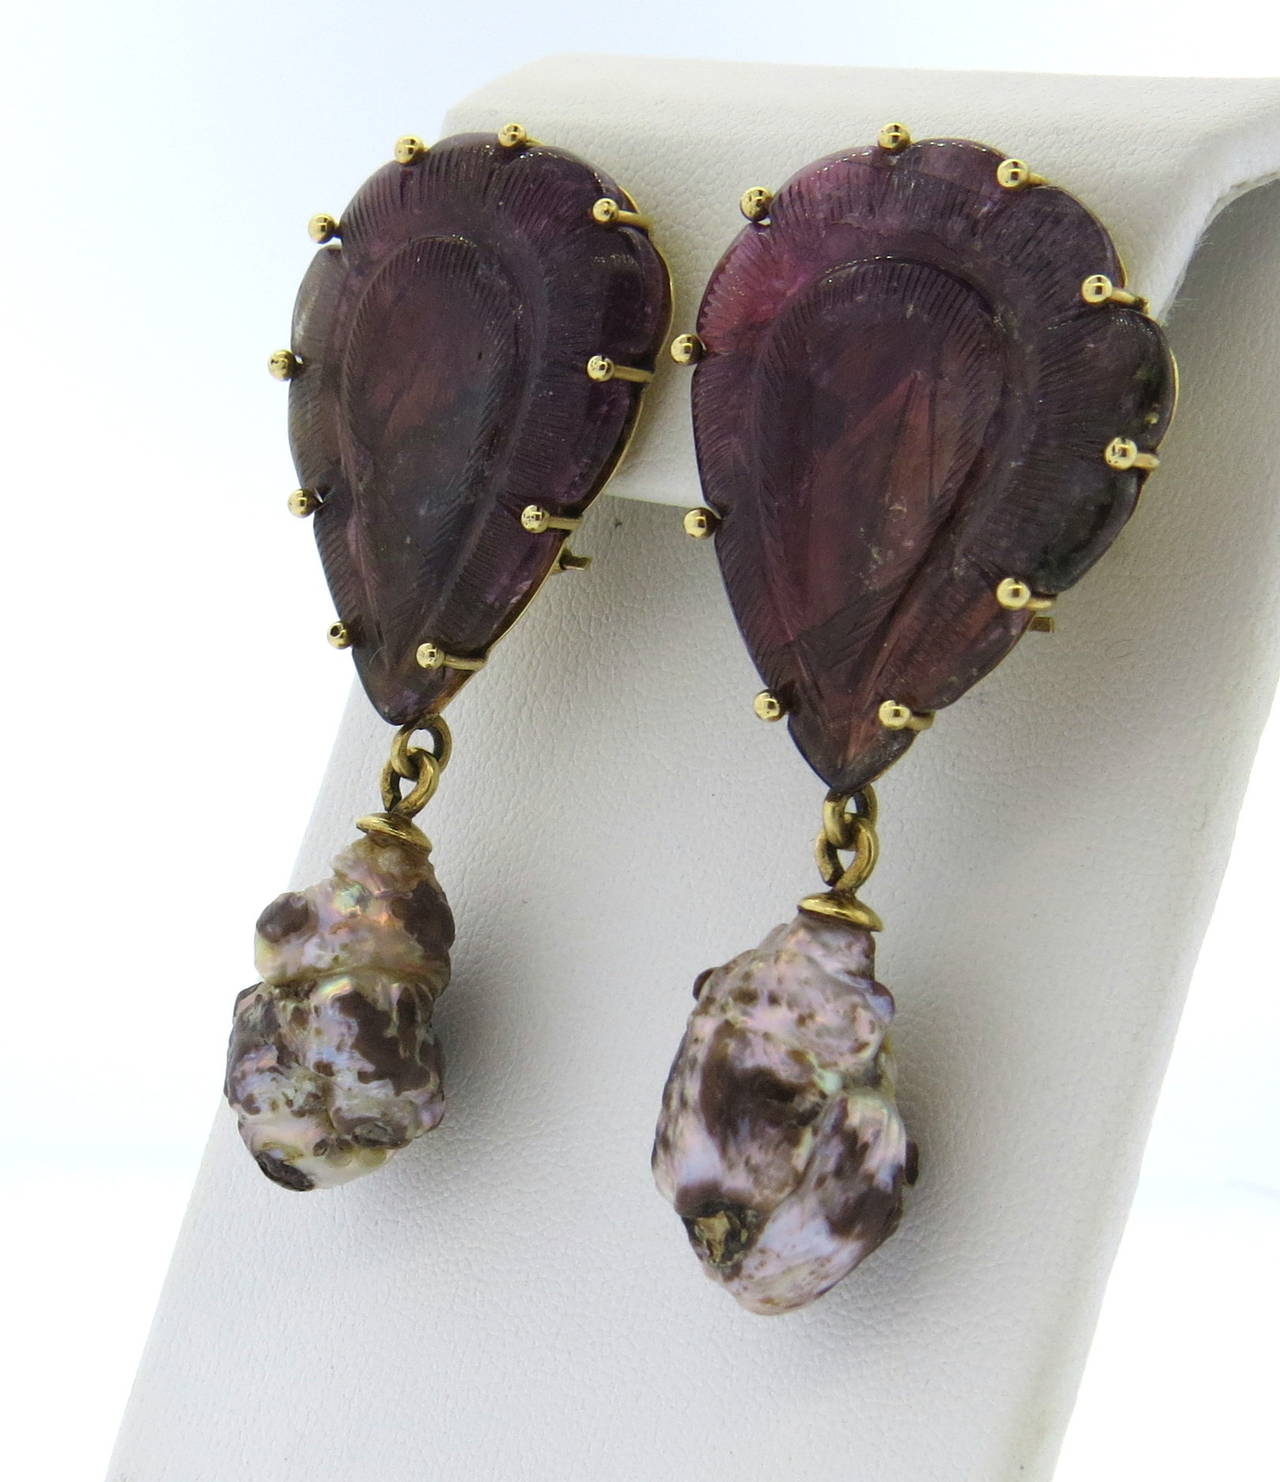 Stephen Dweck 18k gold earrings with hand carved pink tourmalines and natural strawberry pearl drops. Earrings measure 58mm x 28mm. Marked Stephen Dweck  and 18k. Come in original box. Weight - 30.9 grams